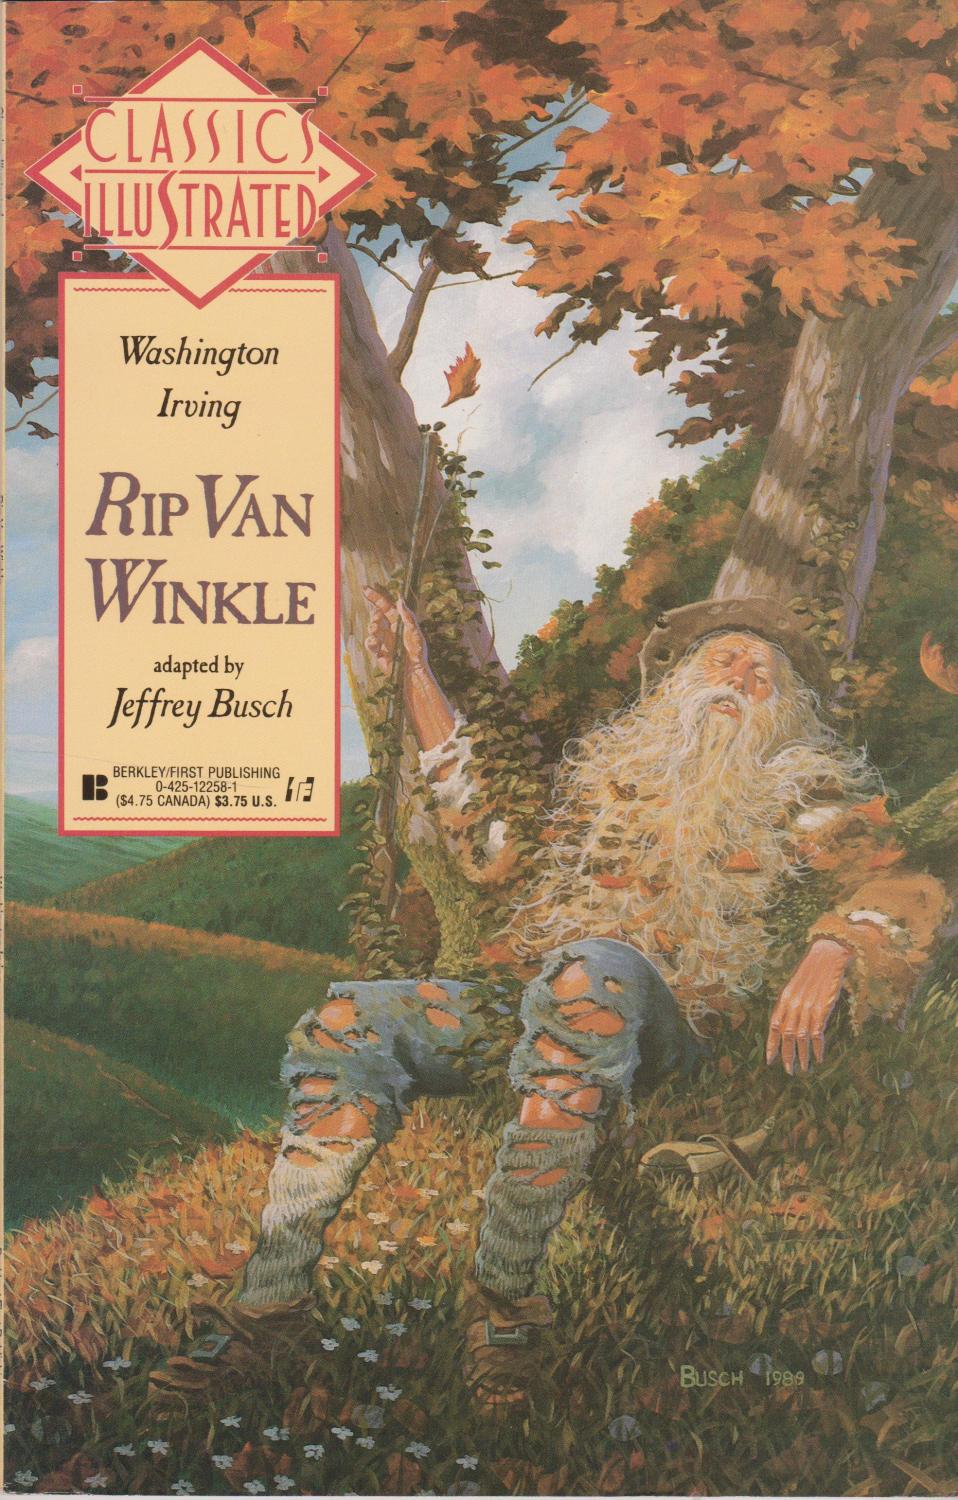 Rip Van Winkle Book Cover depicting Old and tattered Rip Van Winkle waking up from his 20 year nap.